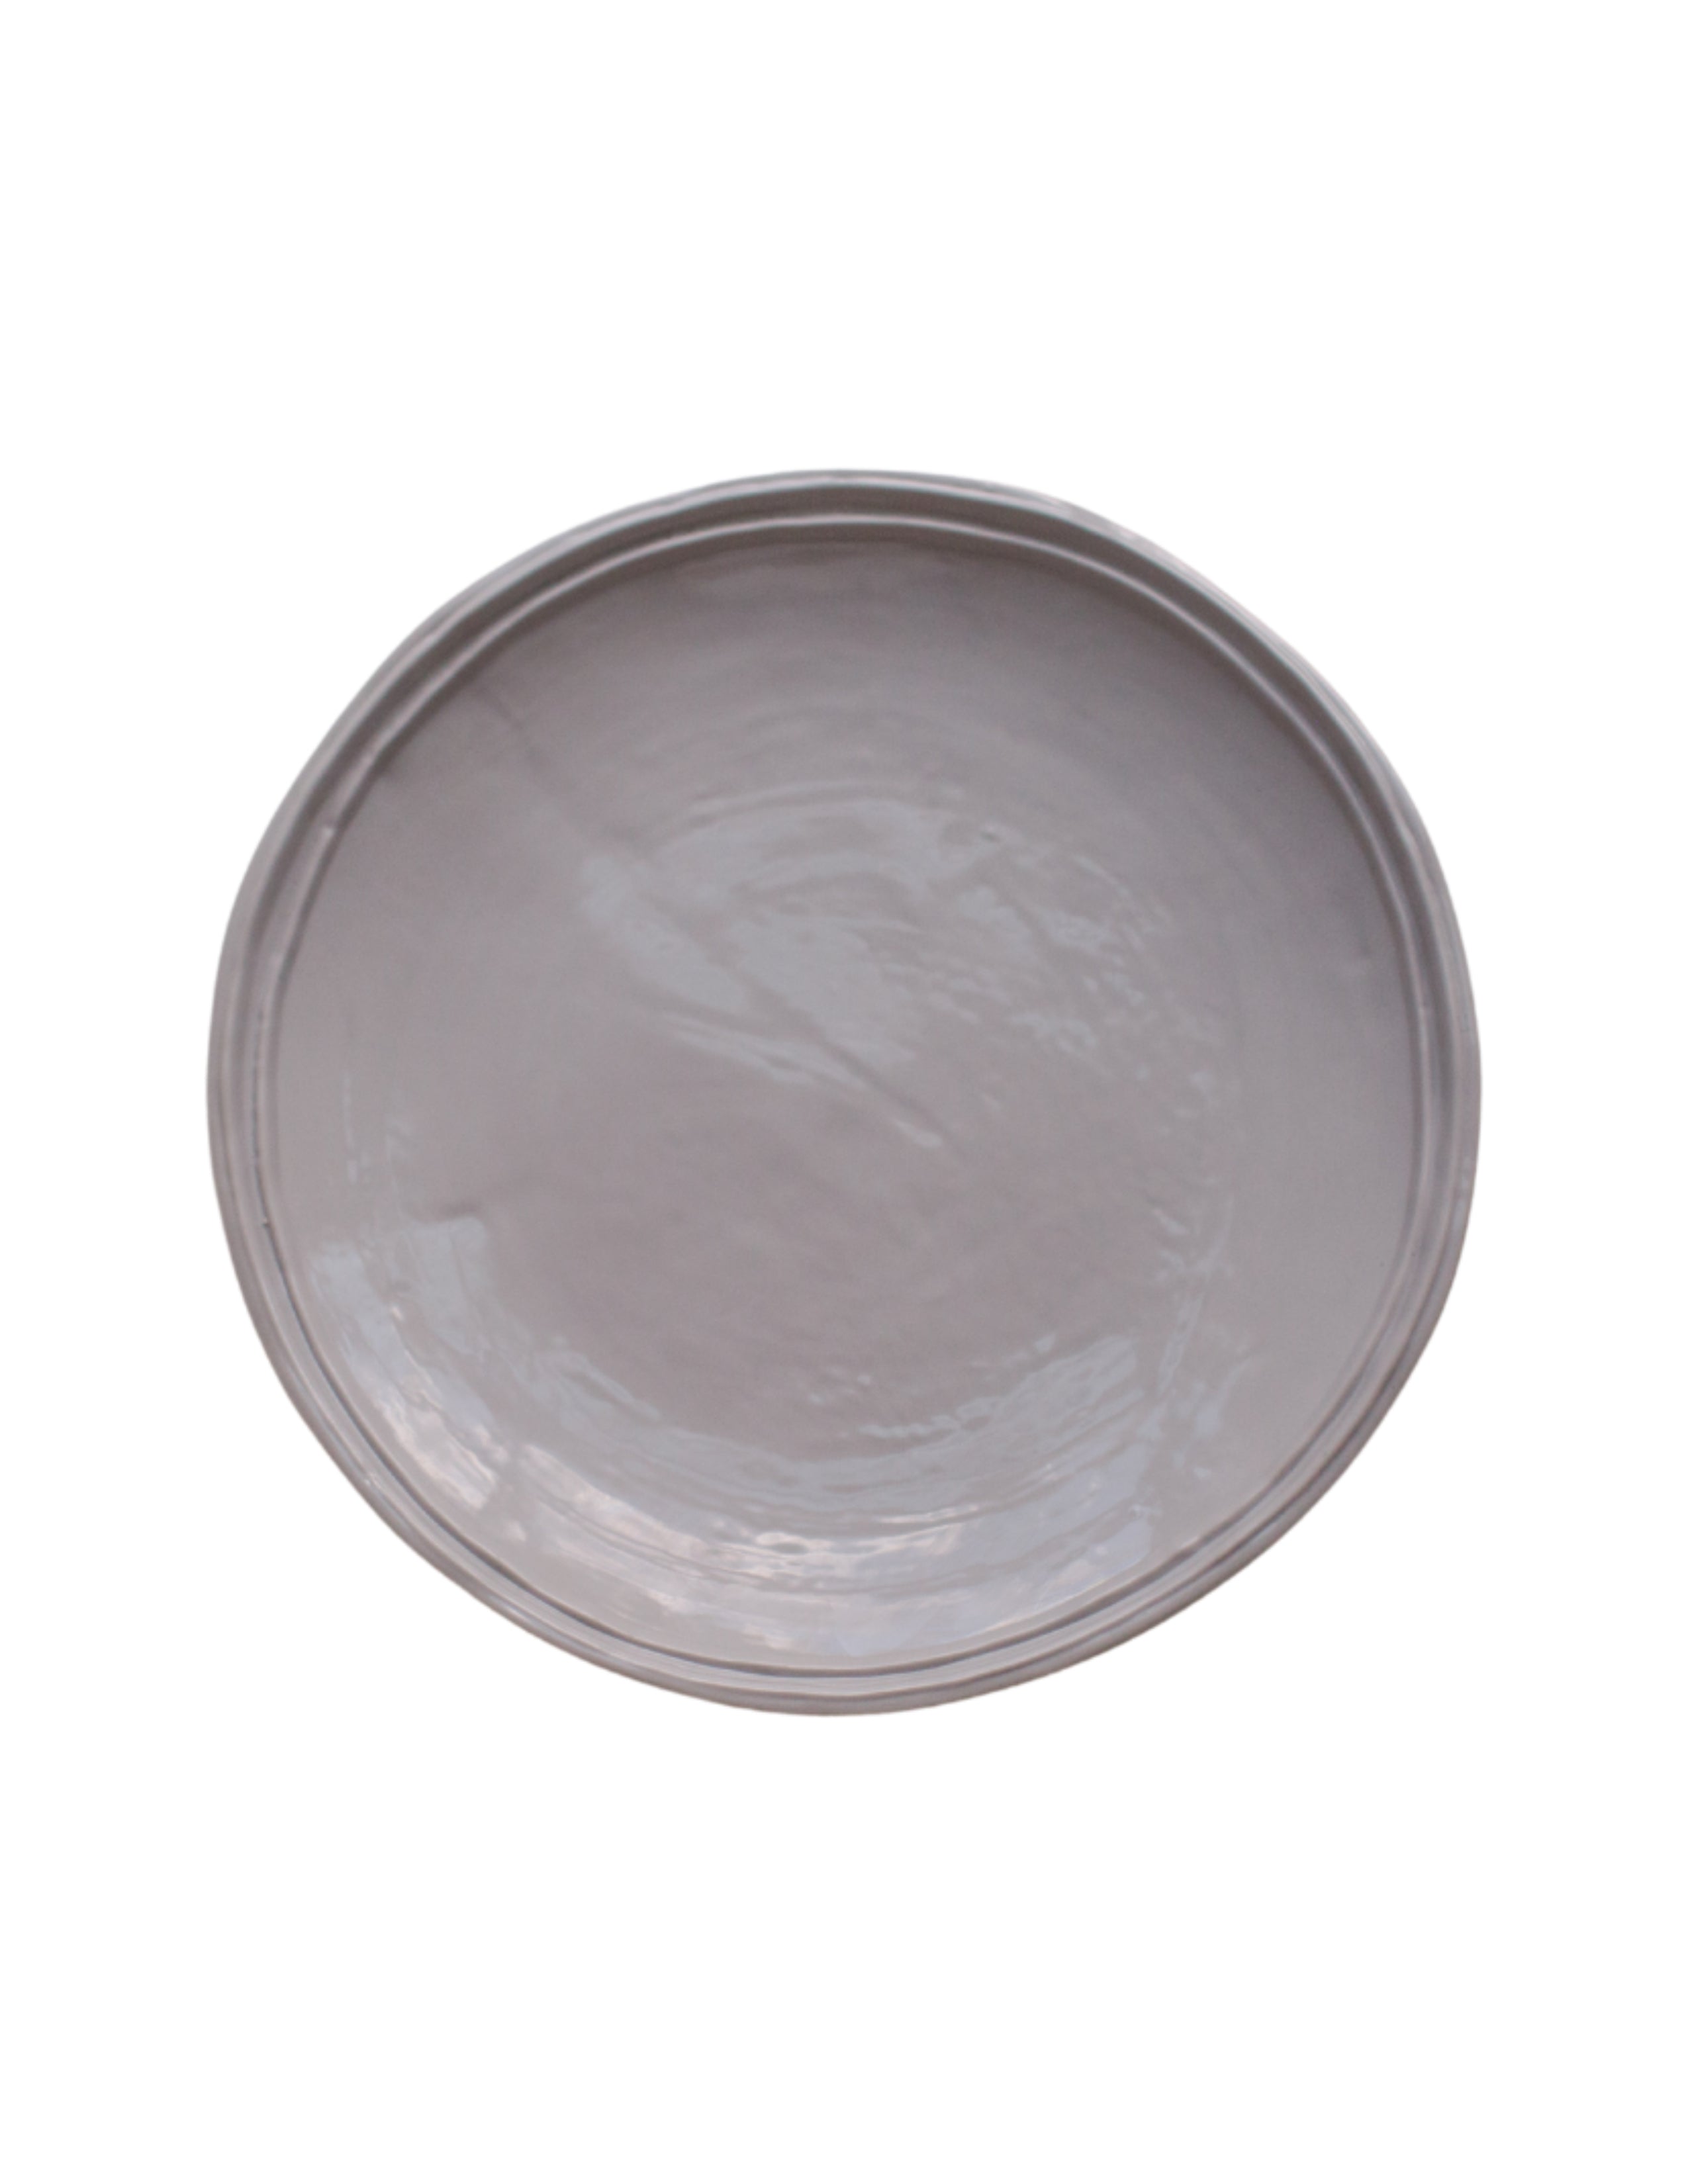 Double Lined Dinner Plate - Stone